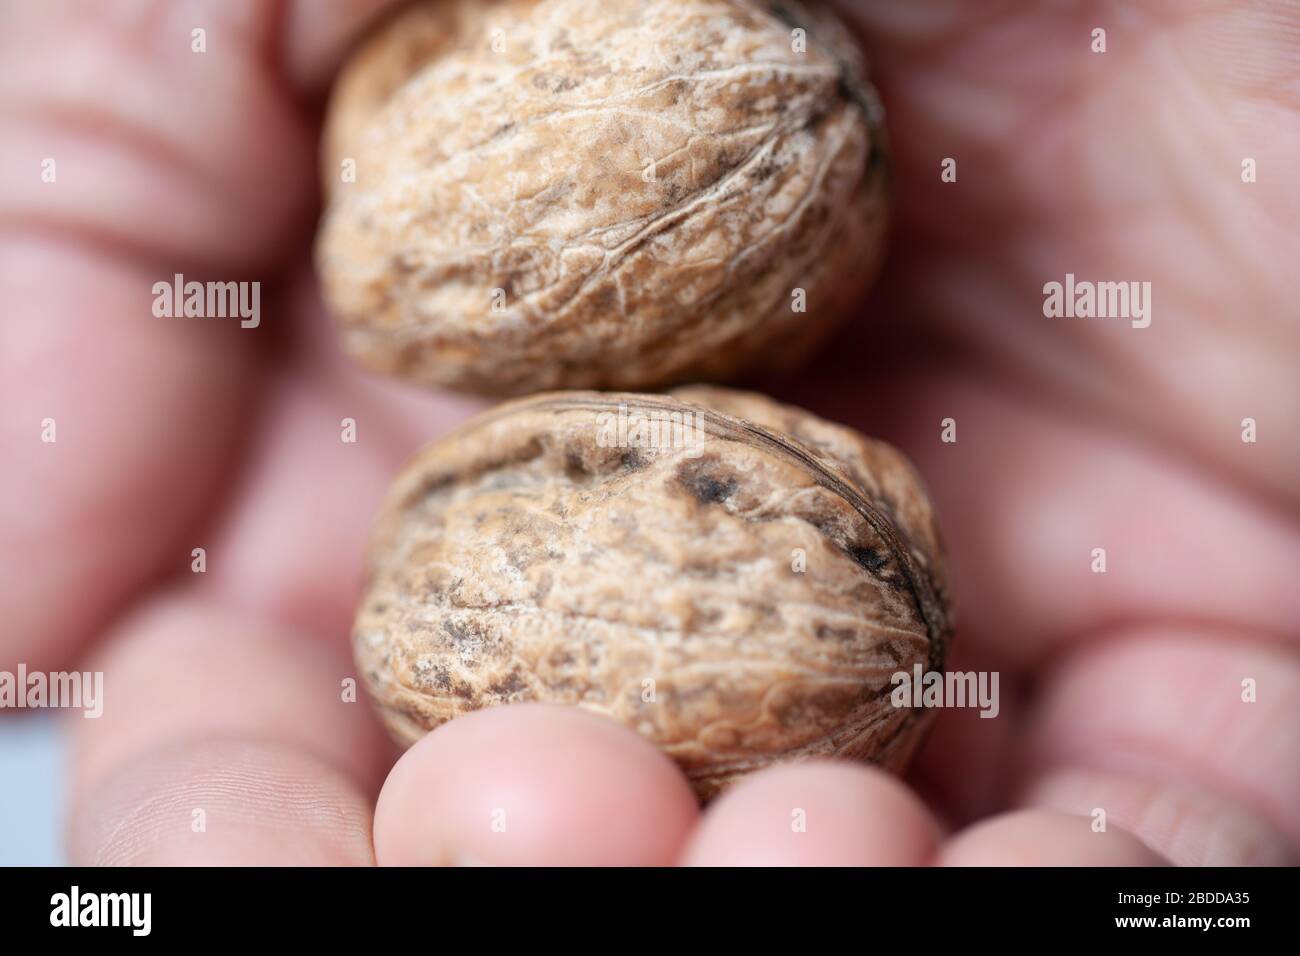 Two ripe walnuts squeezed in a human hand. Walnuts breaking. Stock Photo